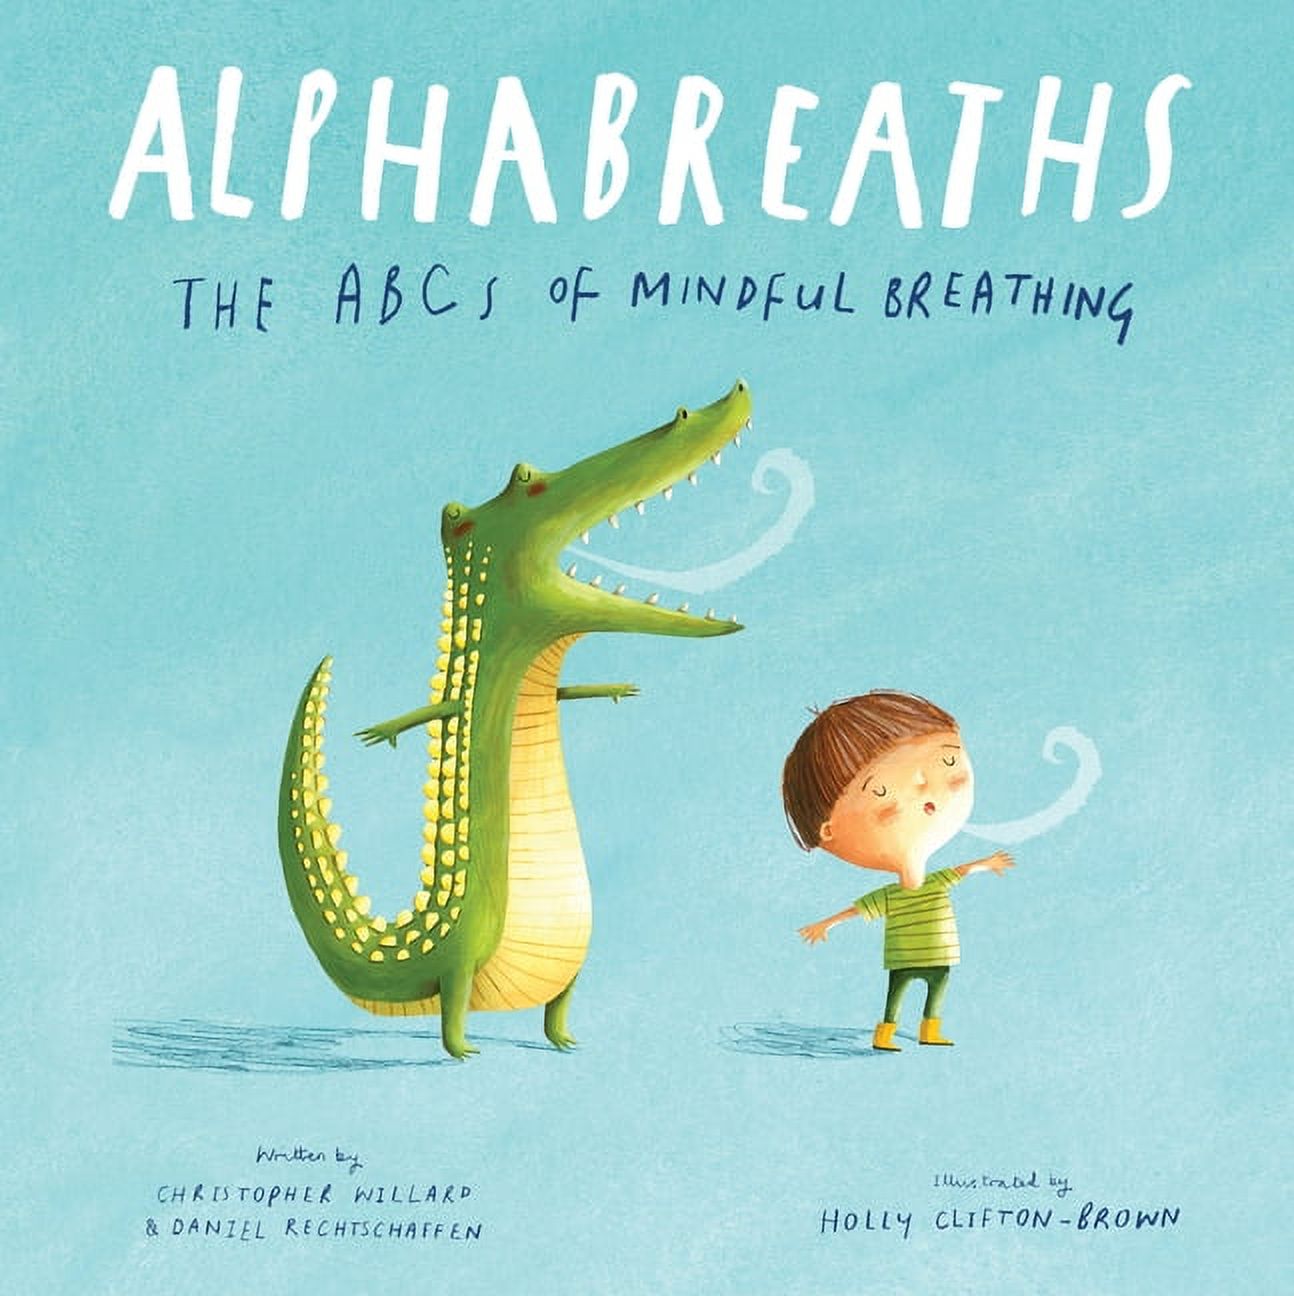 Alphabreaths: The ABCs of Mindful Breathing [Book]